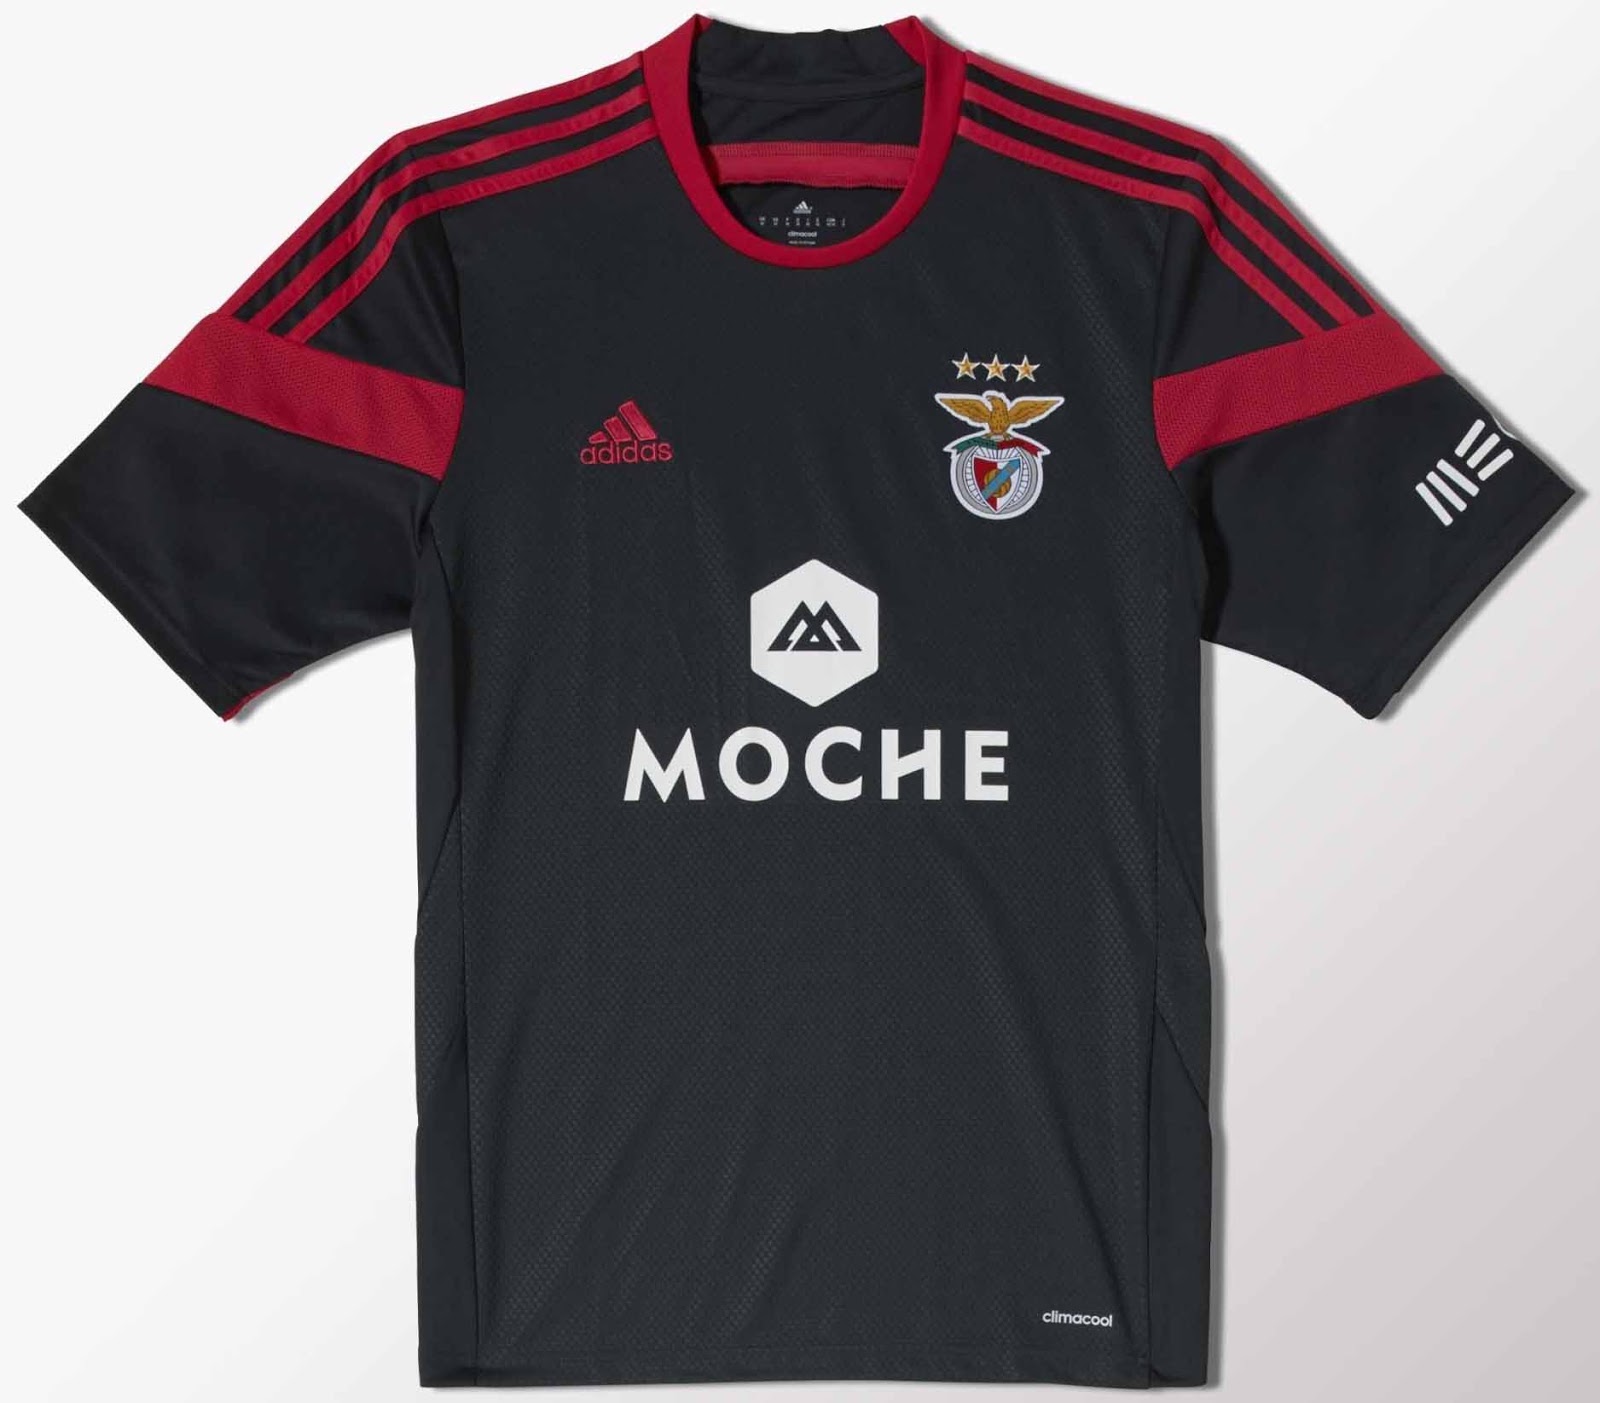 Benfica 14-15 Home and Away Kits Released - Footy Headlines